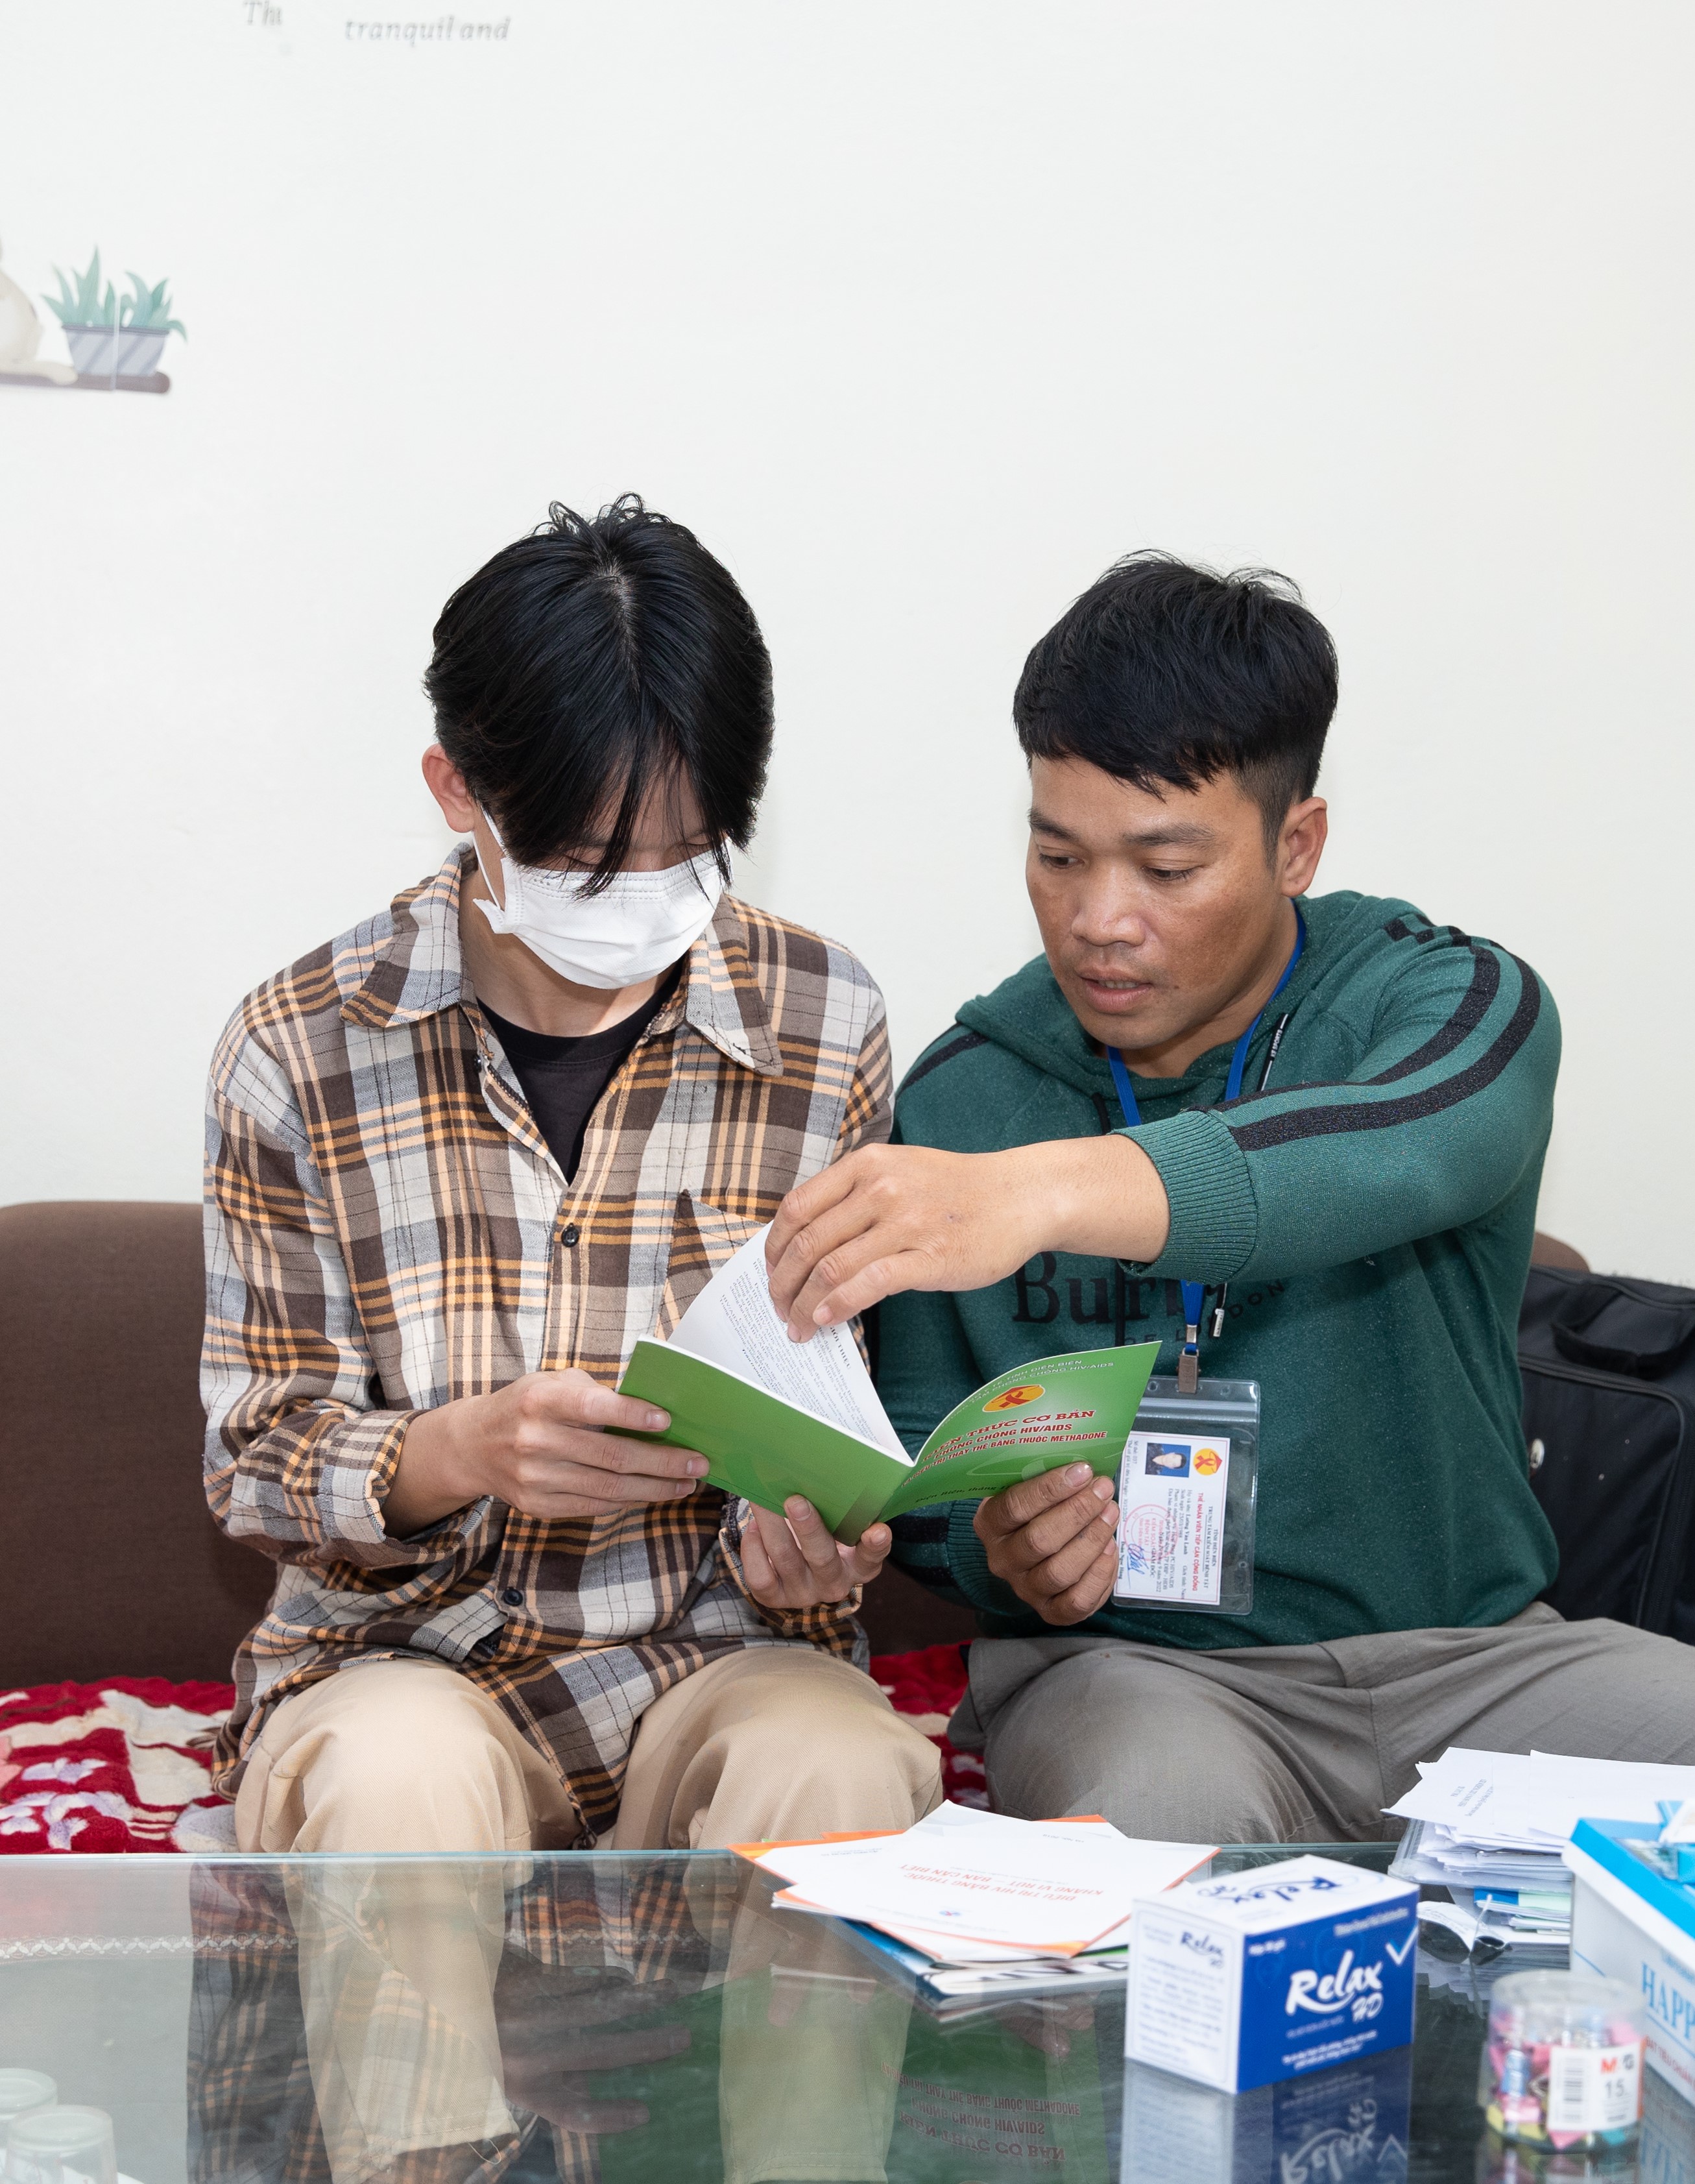 Community worker providing counseling on the use of condoms and lubricant for harm reduction in Dien Bien province, Viet Nam on 24 October 2022 Credit: VAAC (Vietnam Administration of HIV/AIDS Control)/UNAIDS/LHSS (Local Health System Sustainability Project)